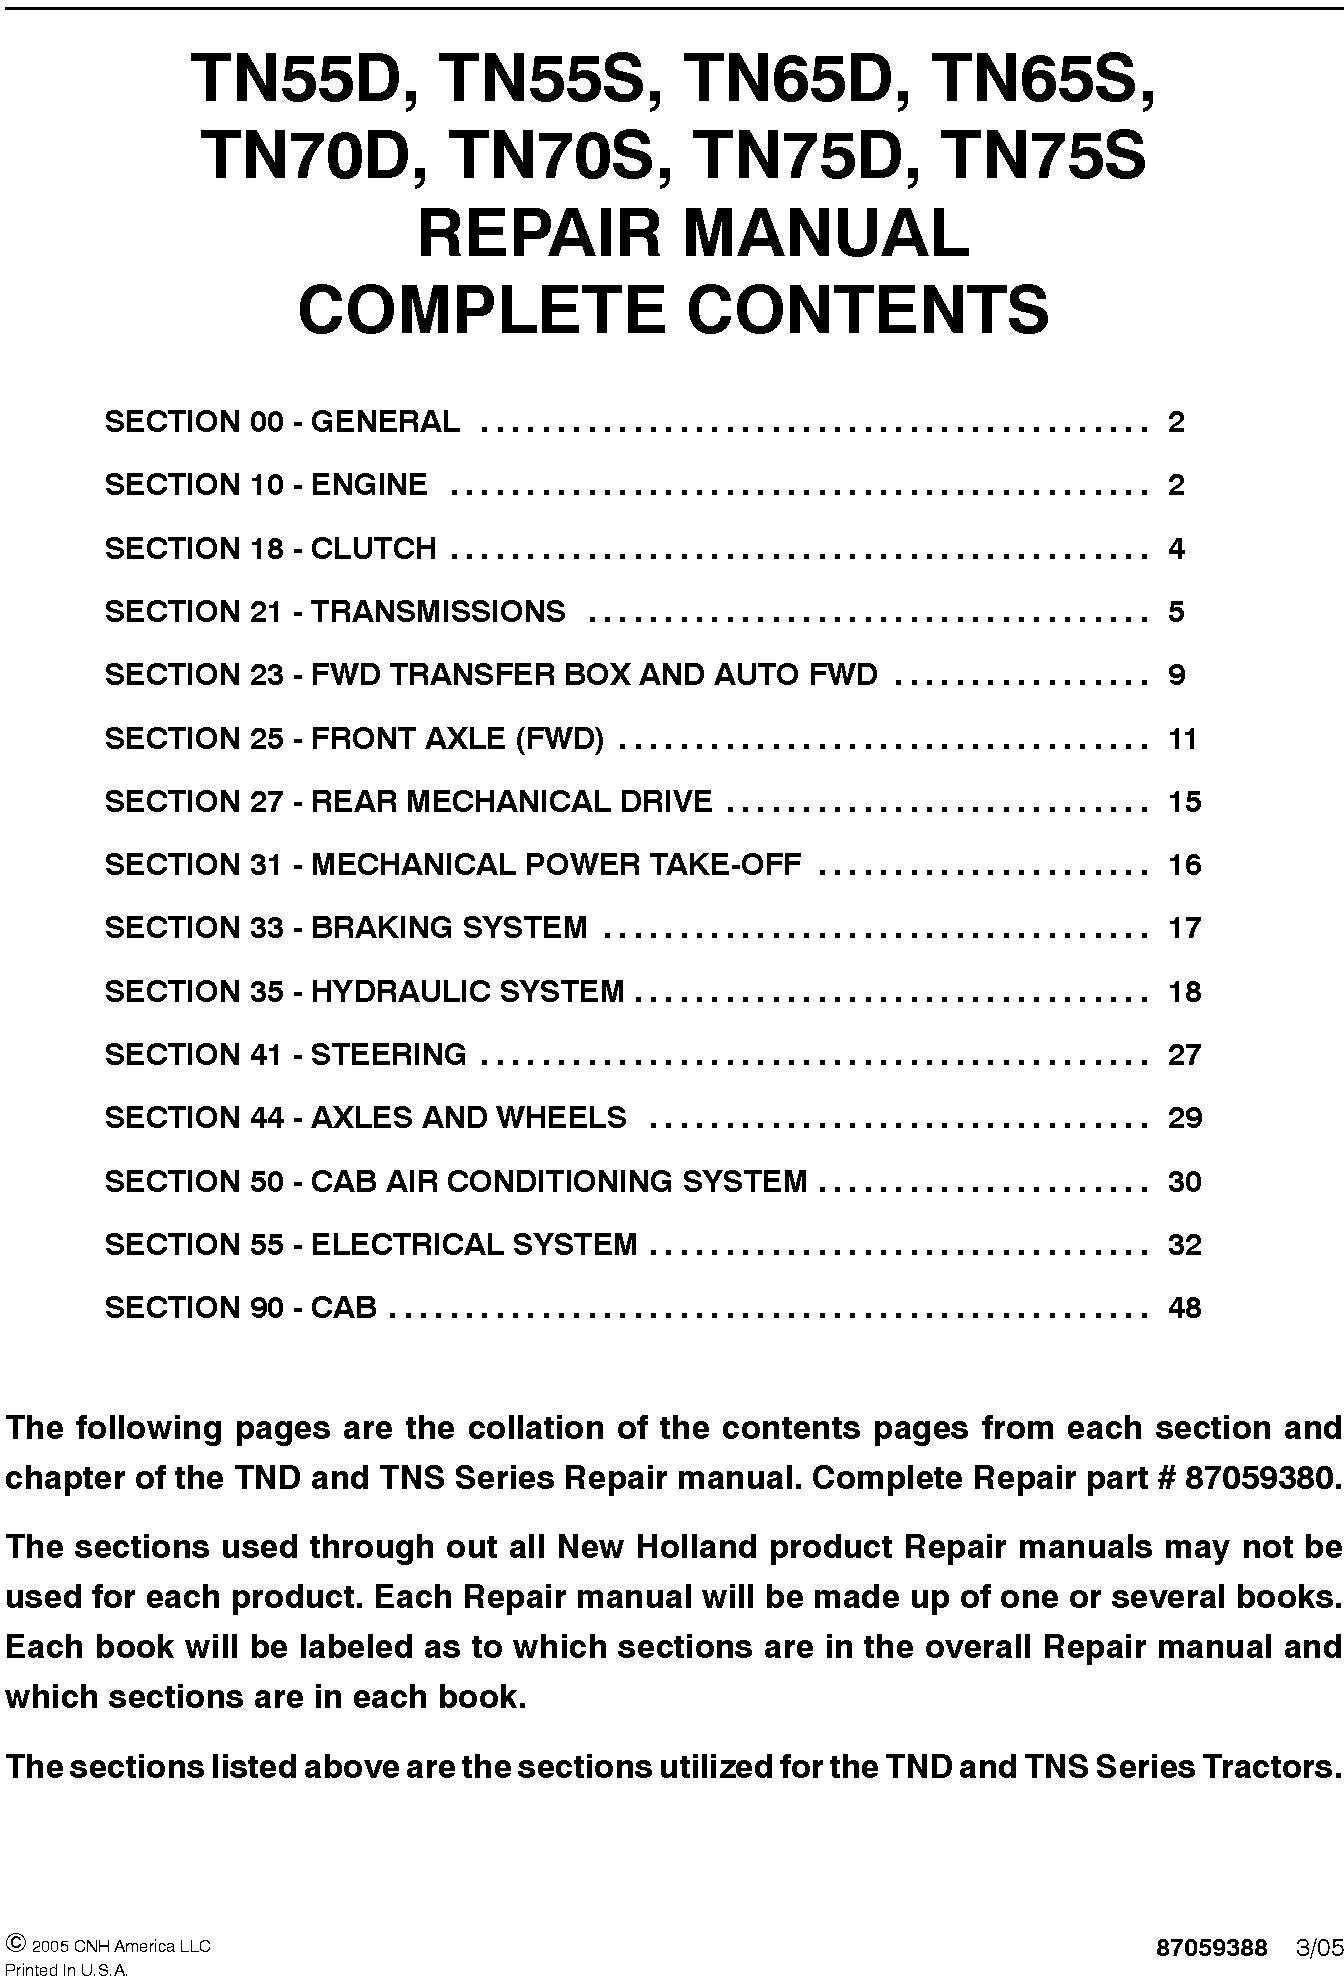 New Holland TN55D, TN65D, TN70D, TN75D, TN55S, TN65S, TN70S, TN75S Tractor Service Manual